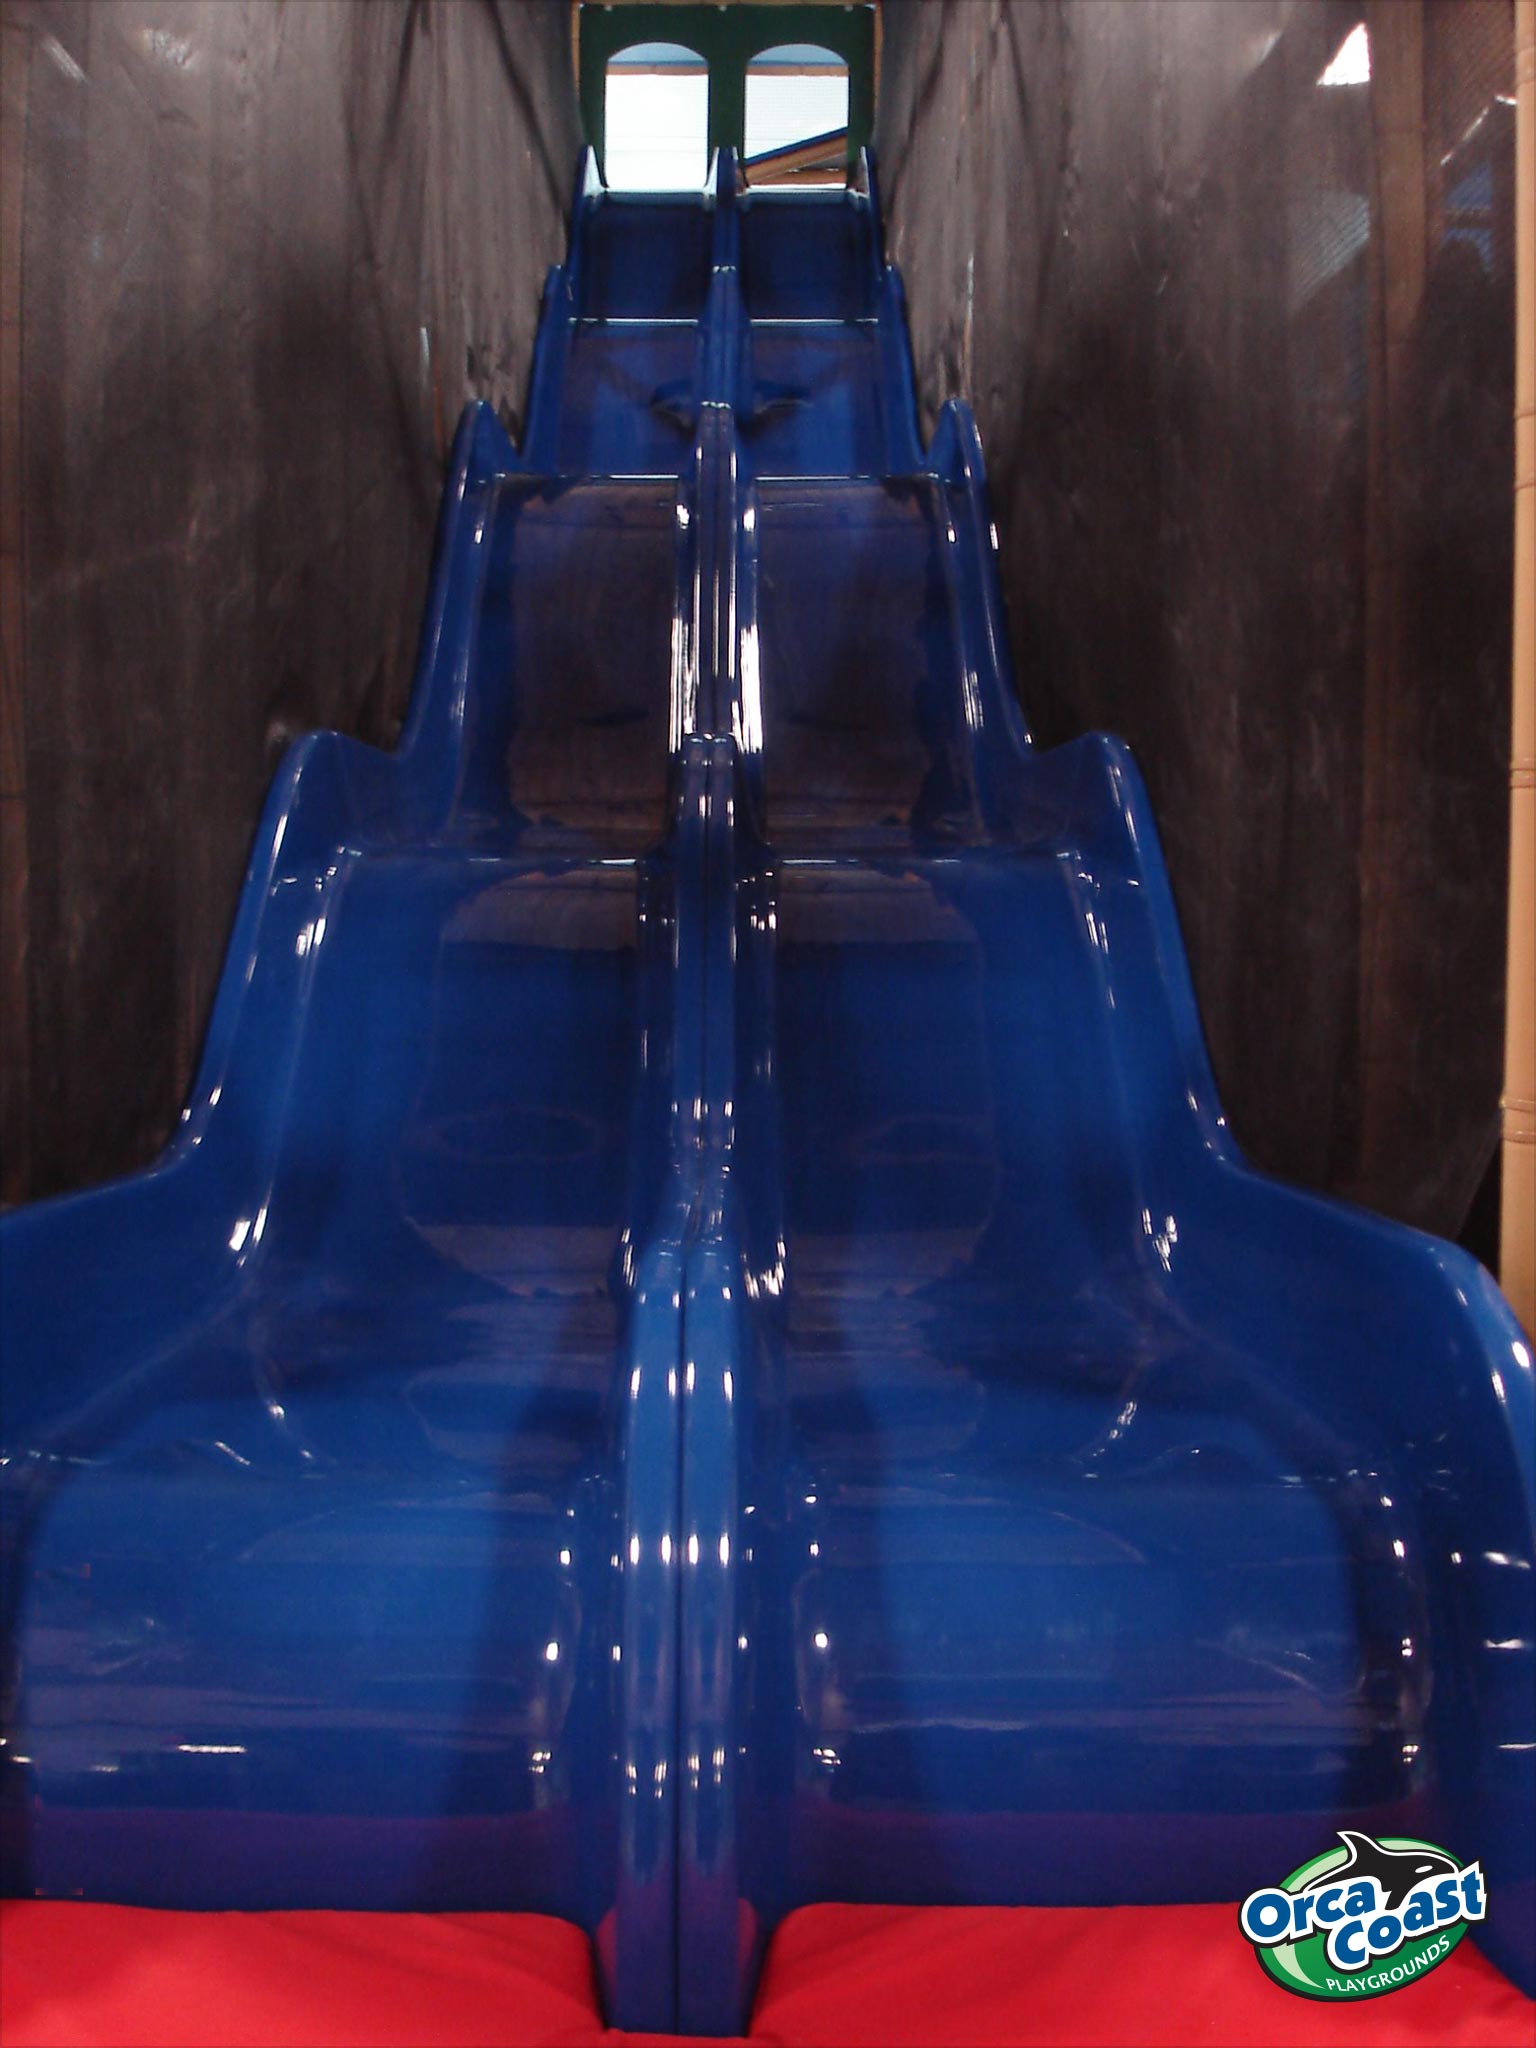 The indoor slide at First Baptist Church of Coppell